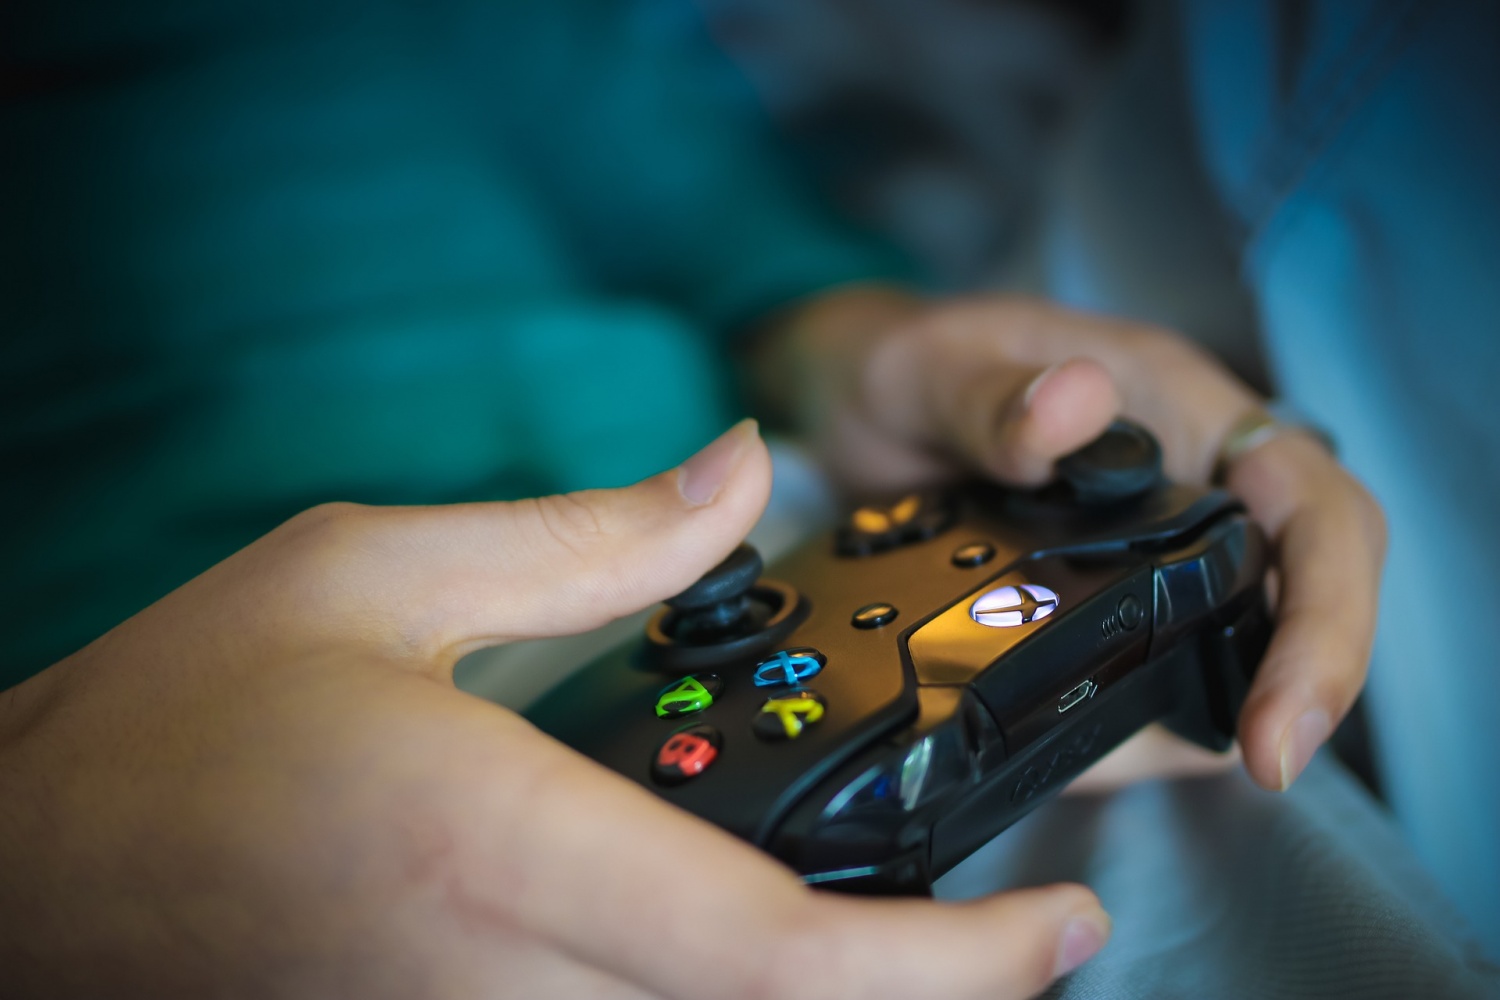 Video Games Are Being Used by Foreign Actors and Extremists, New Study Finds